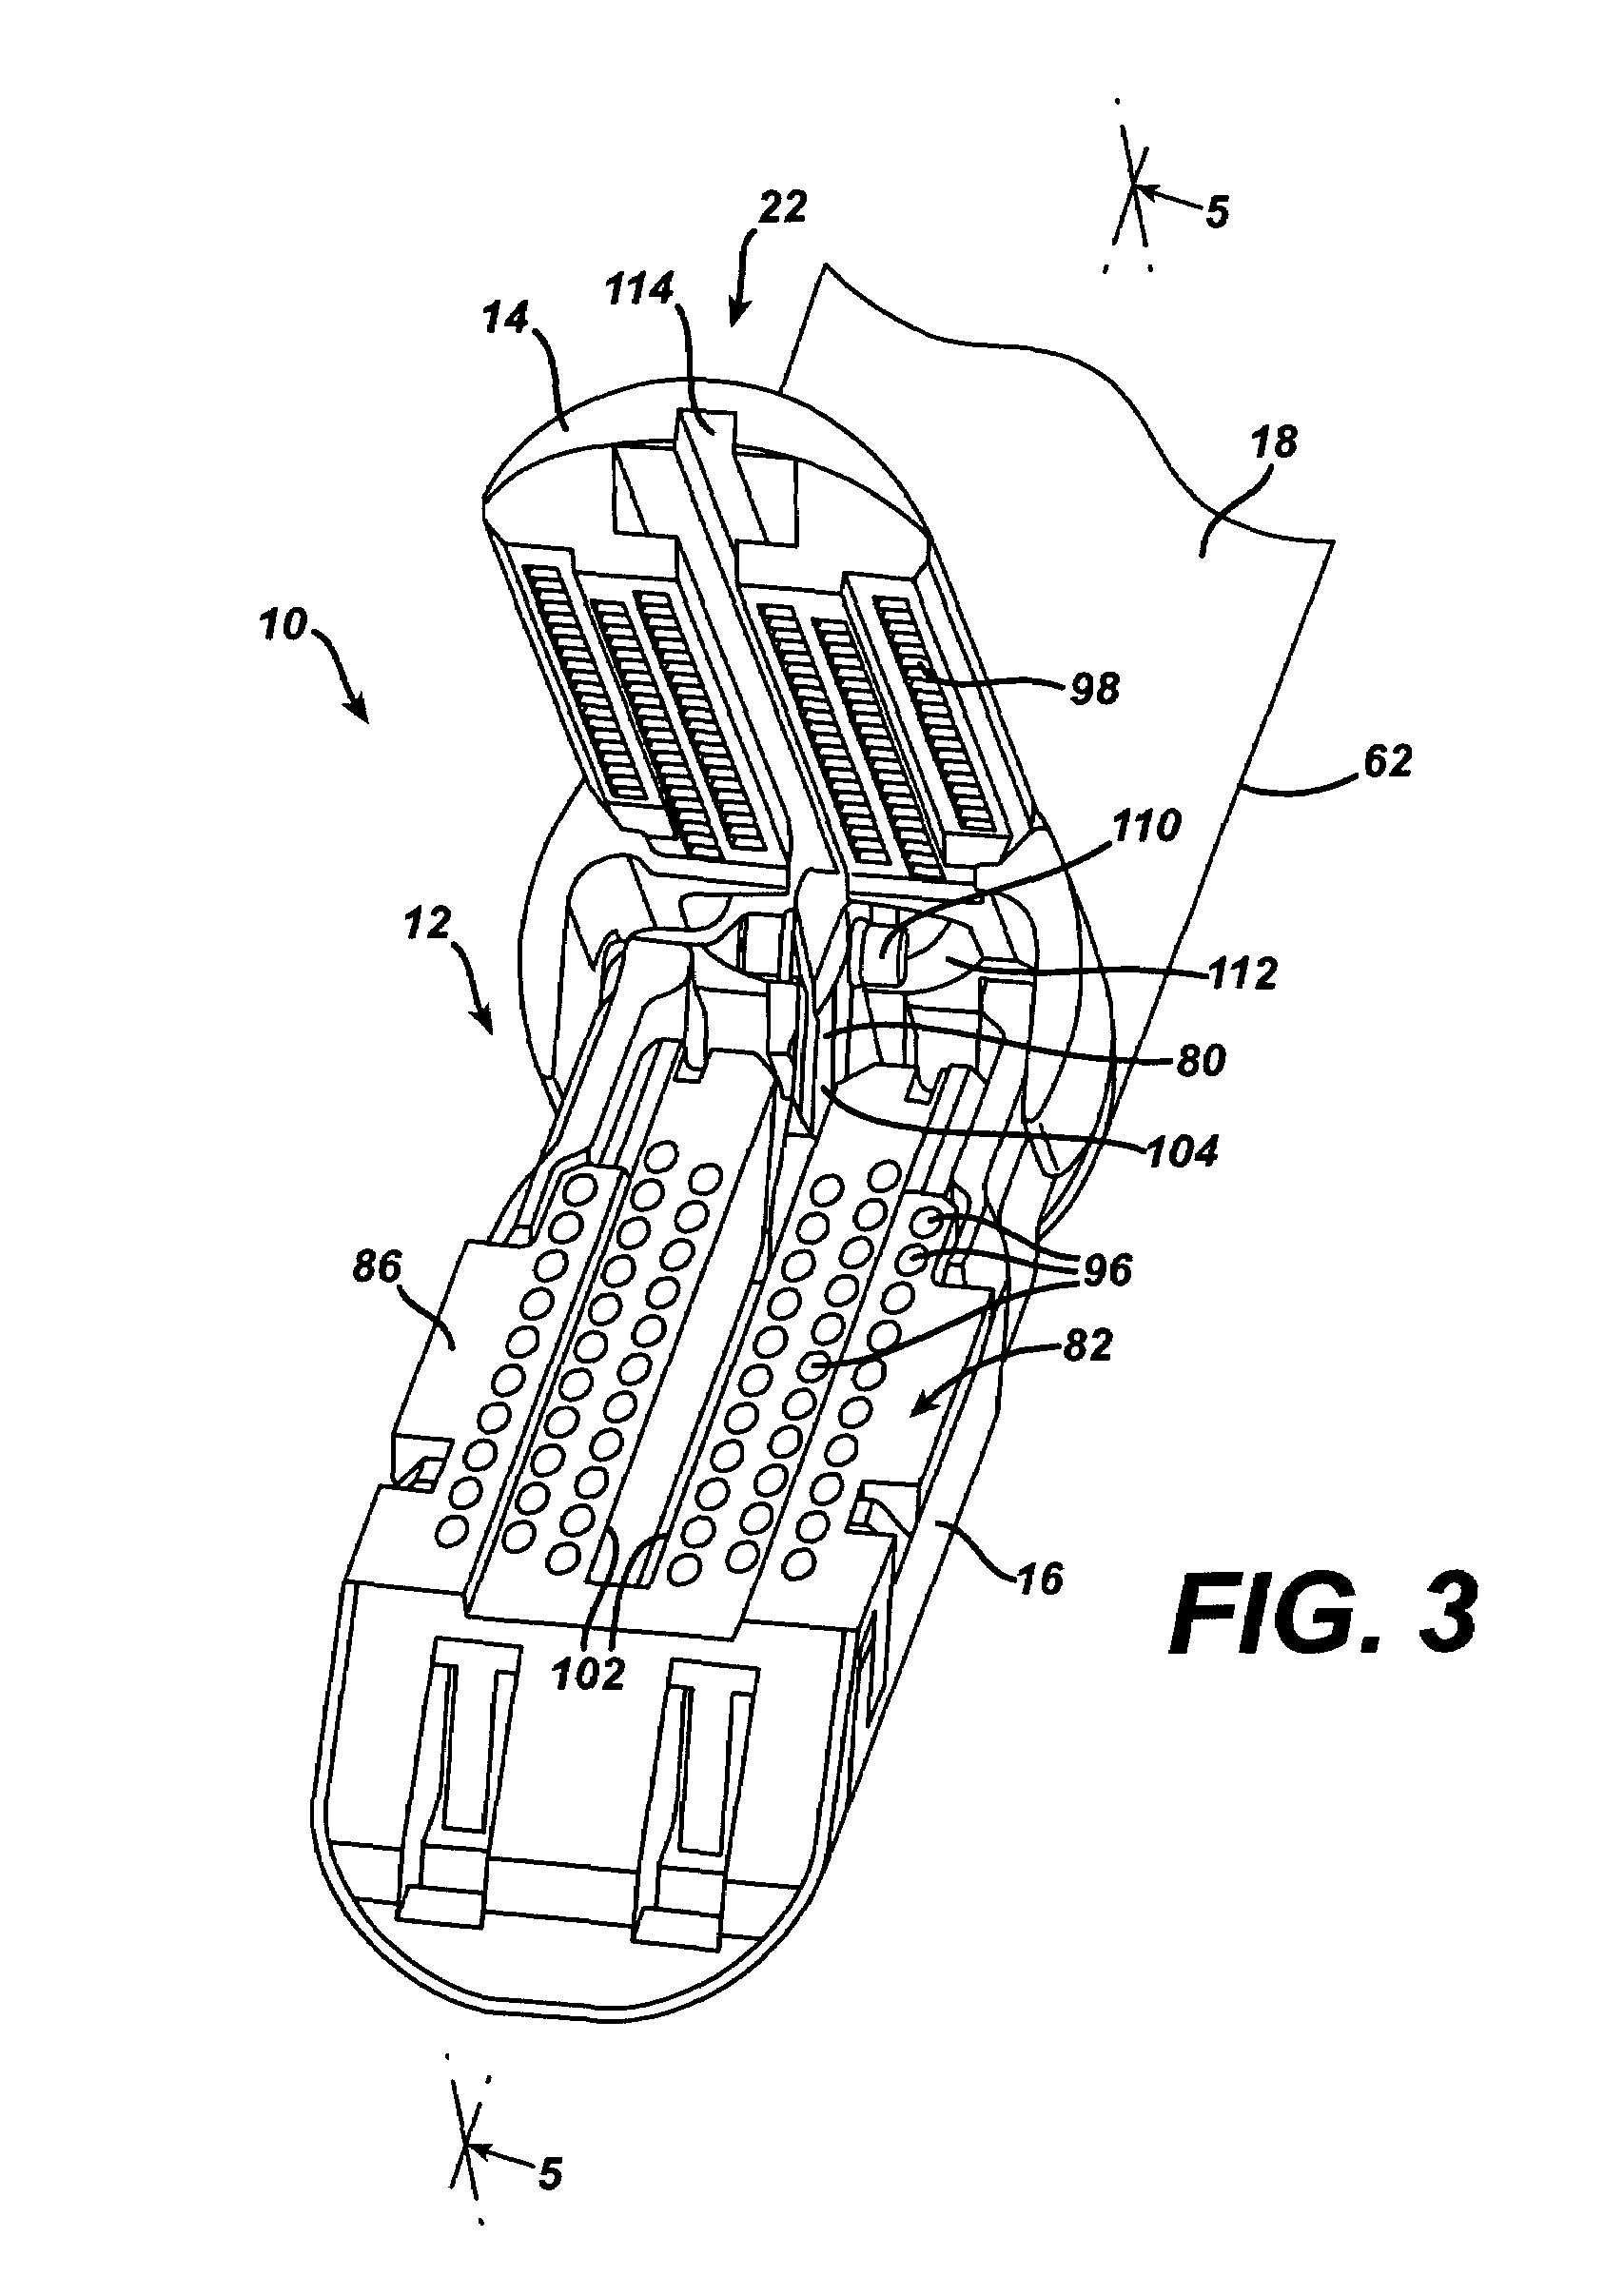 Multi-stroke mechanism with automatic end of stroke retraction